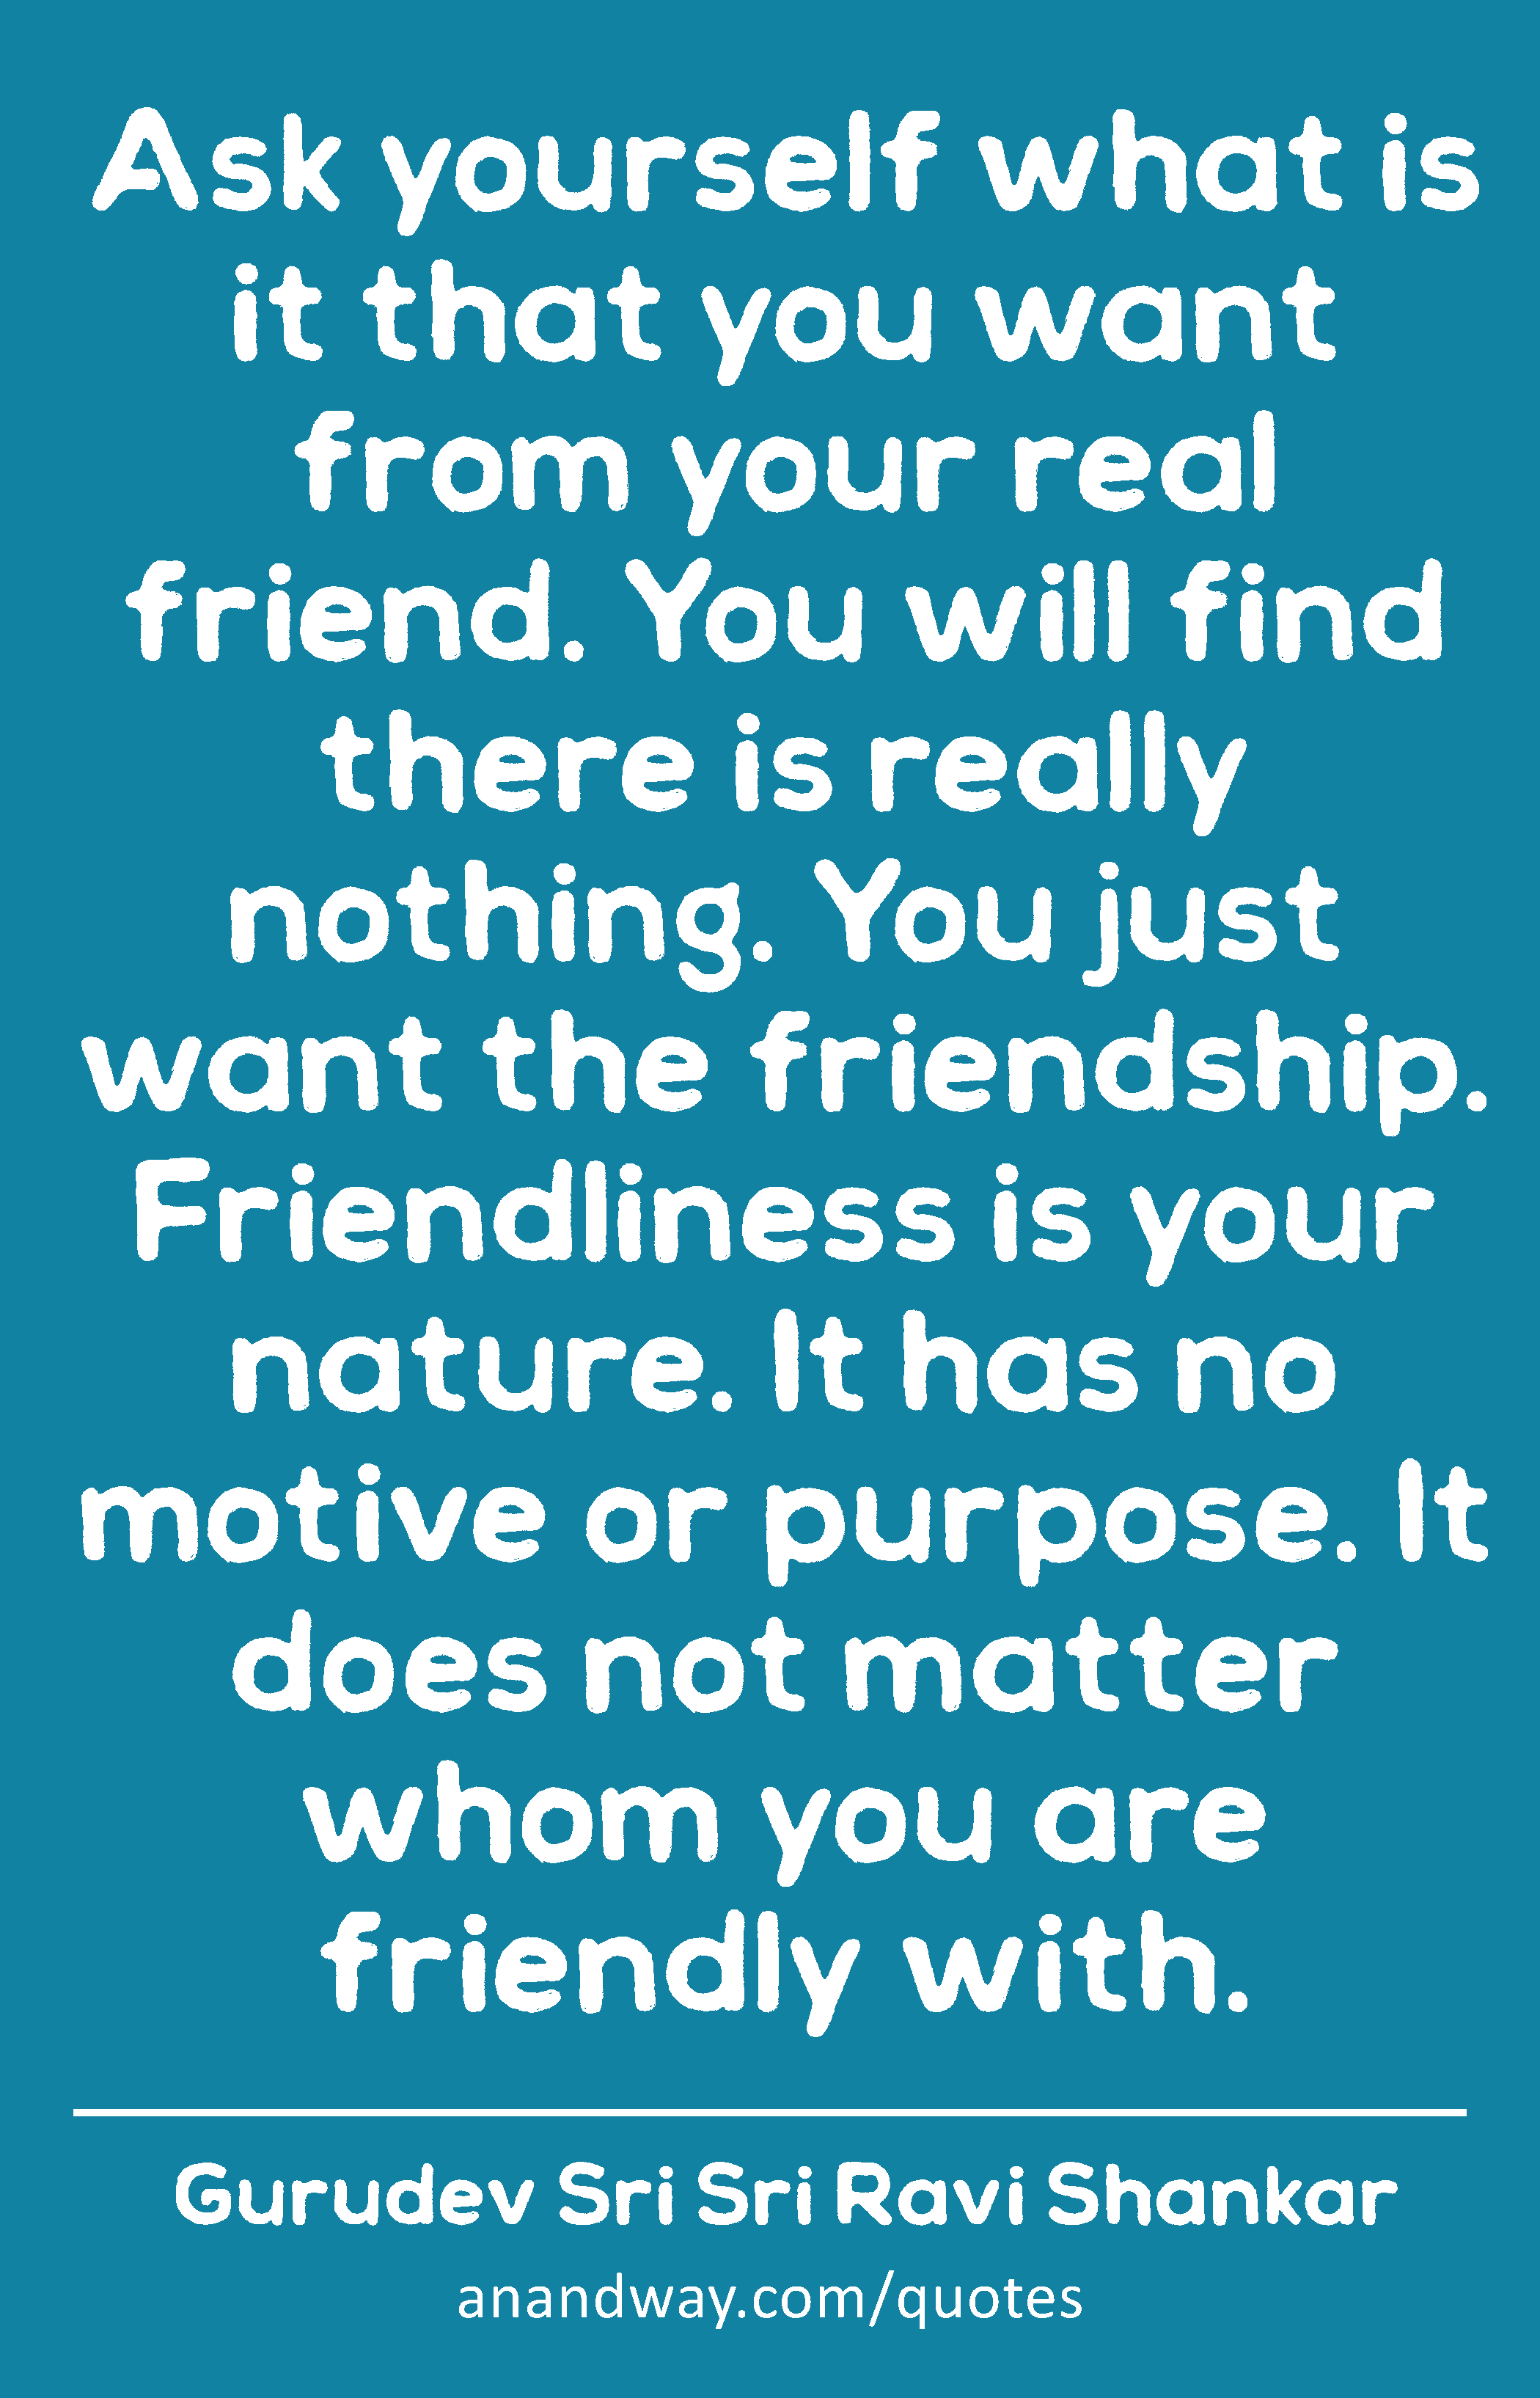 Ask yourself what is it that you want from your real friend. You will find there is really nothing.
 -Gurudev Sri Sri Ravi Shankar